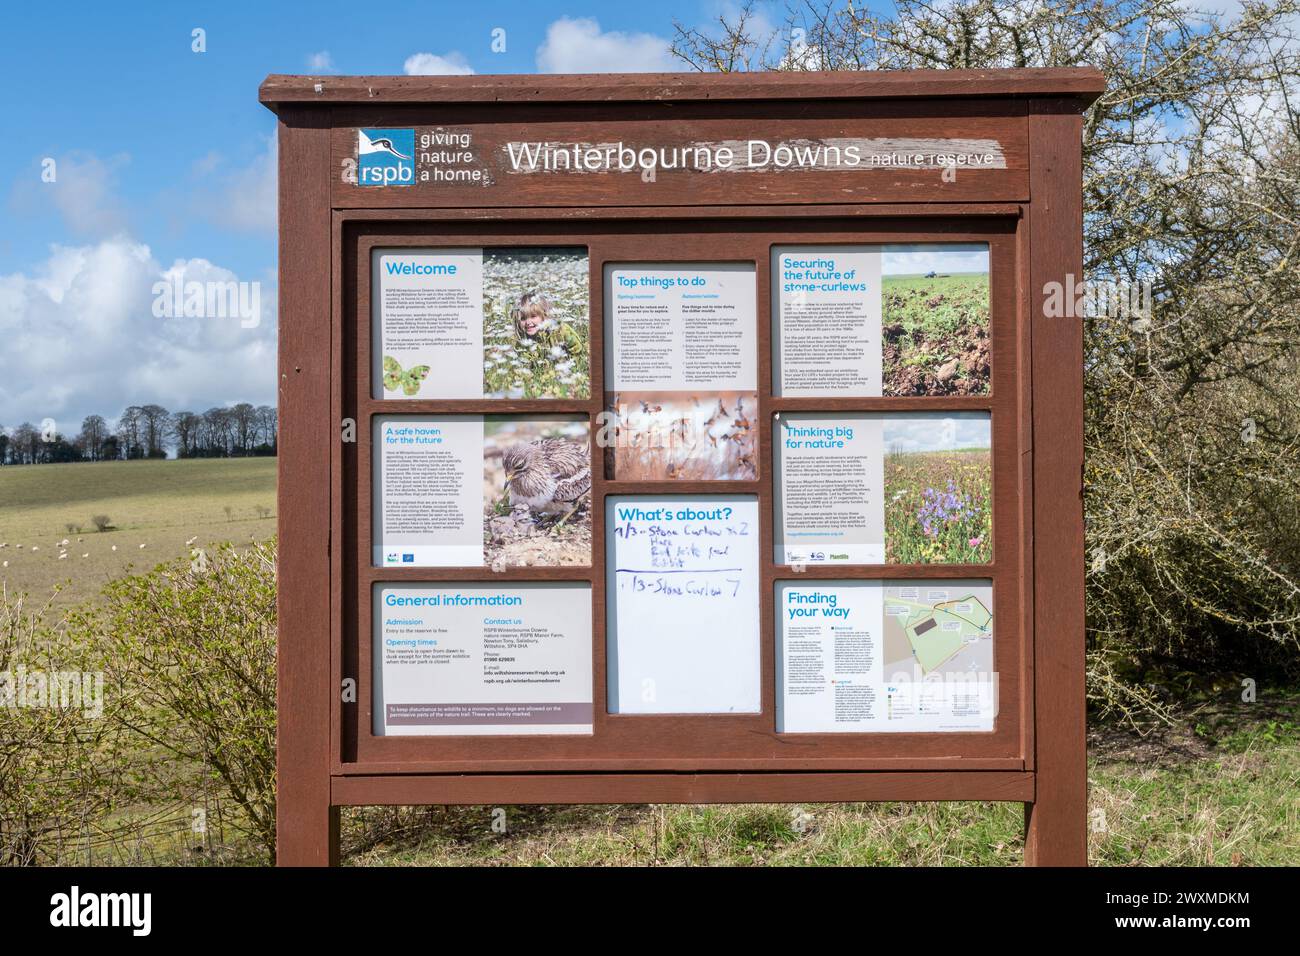 RSPB Winterbourne Downs nature reserve in Spring, Wiltshire, England, UK. Information Board at entrance to the reserve. Stock Photo